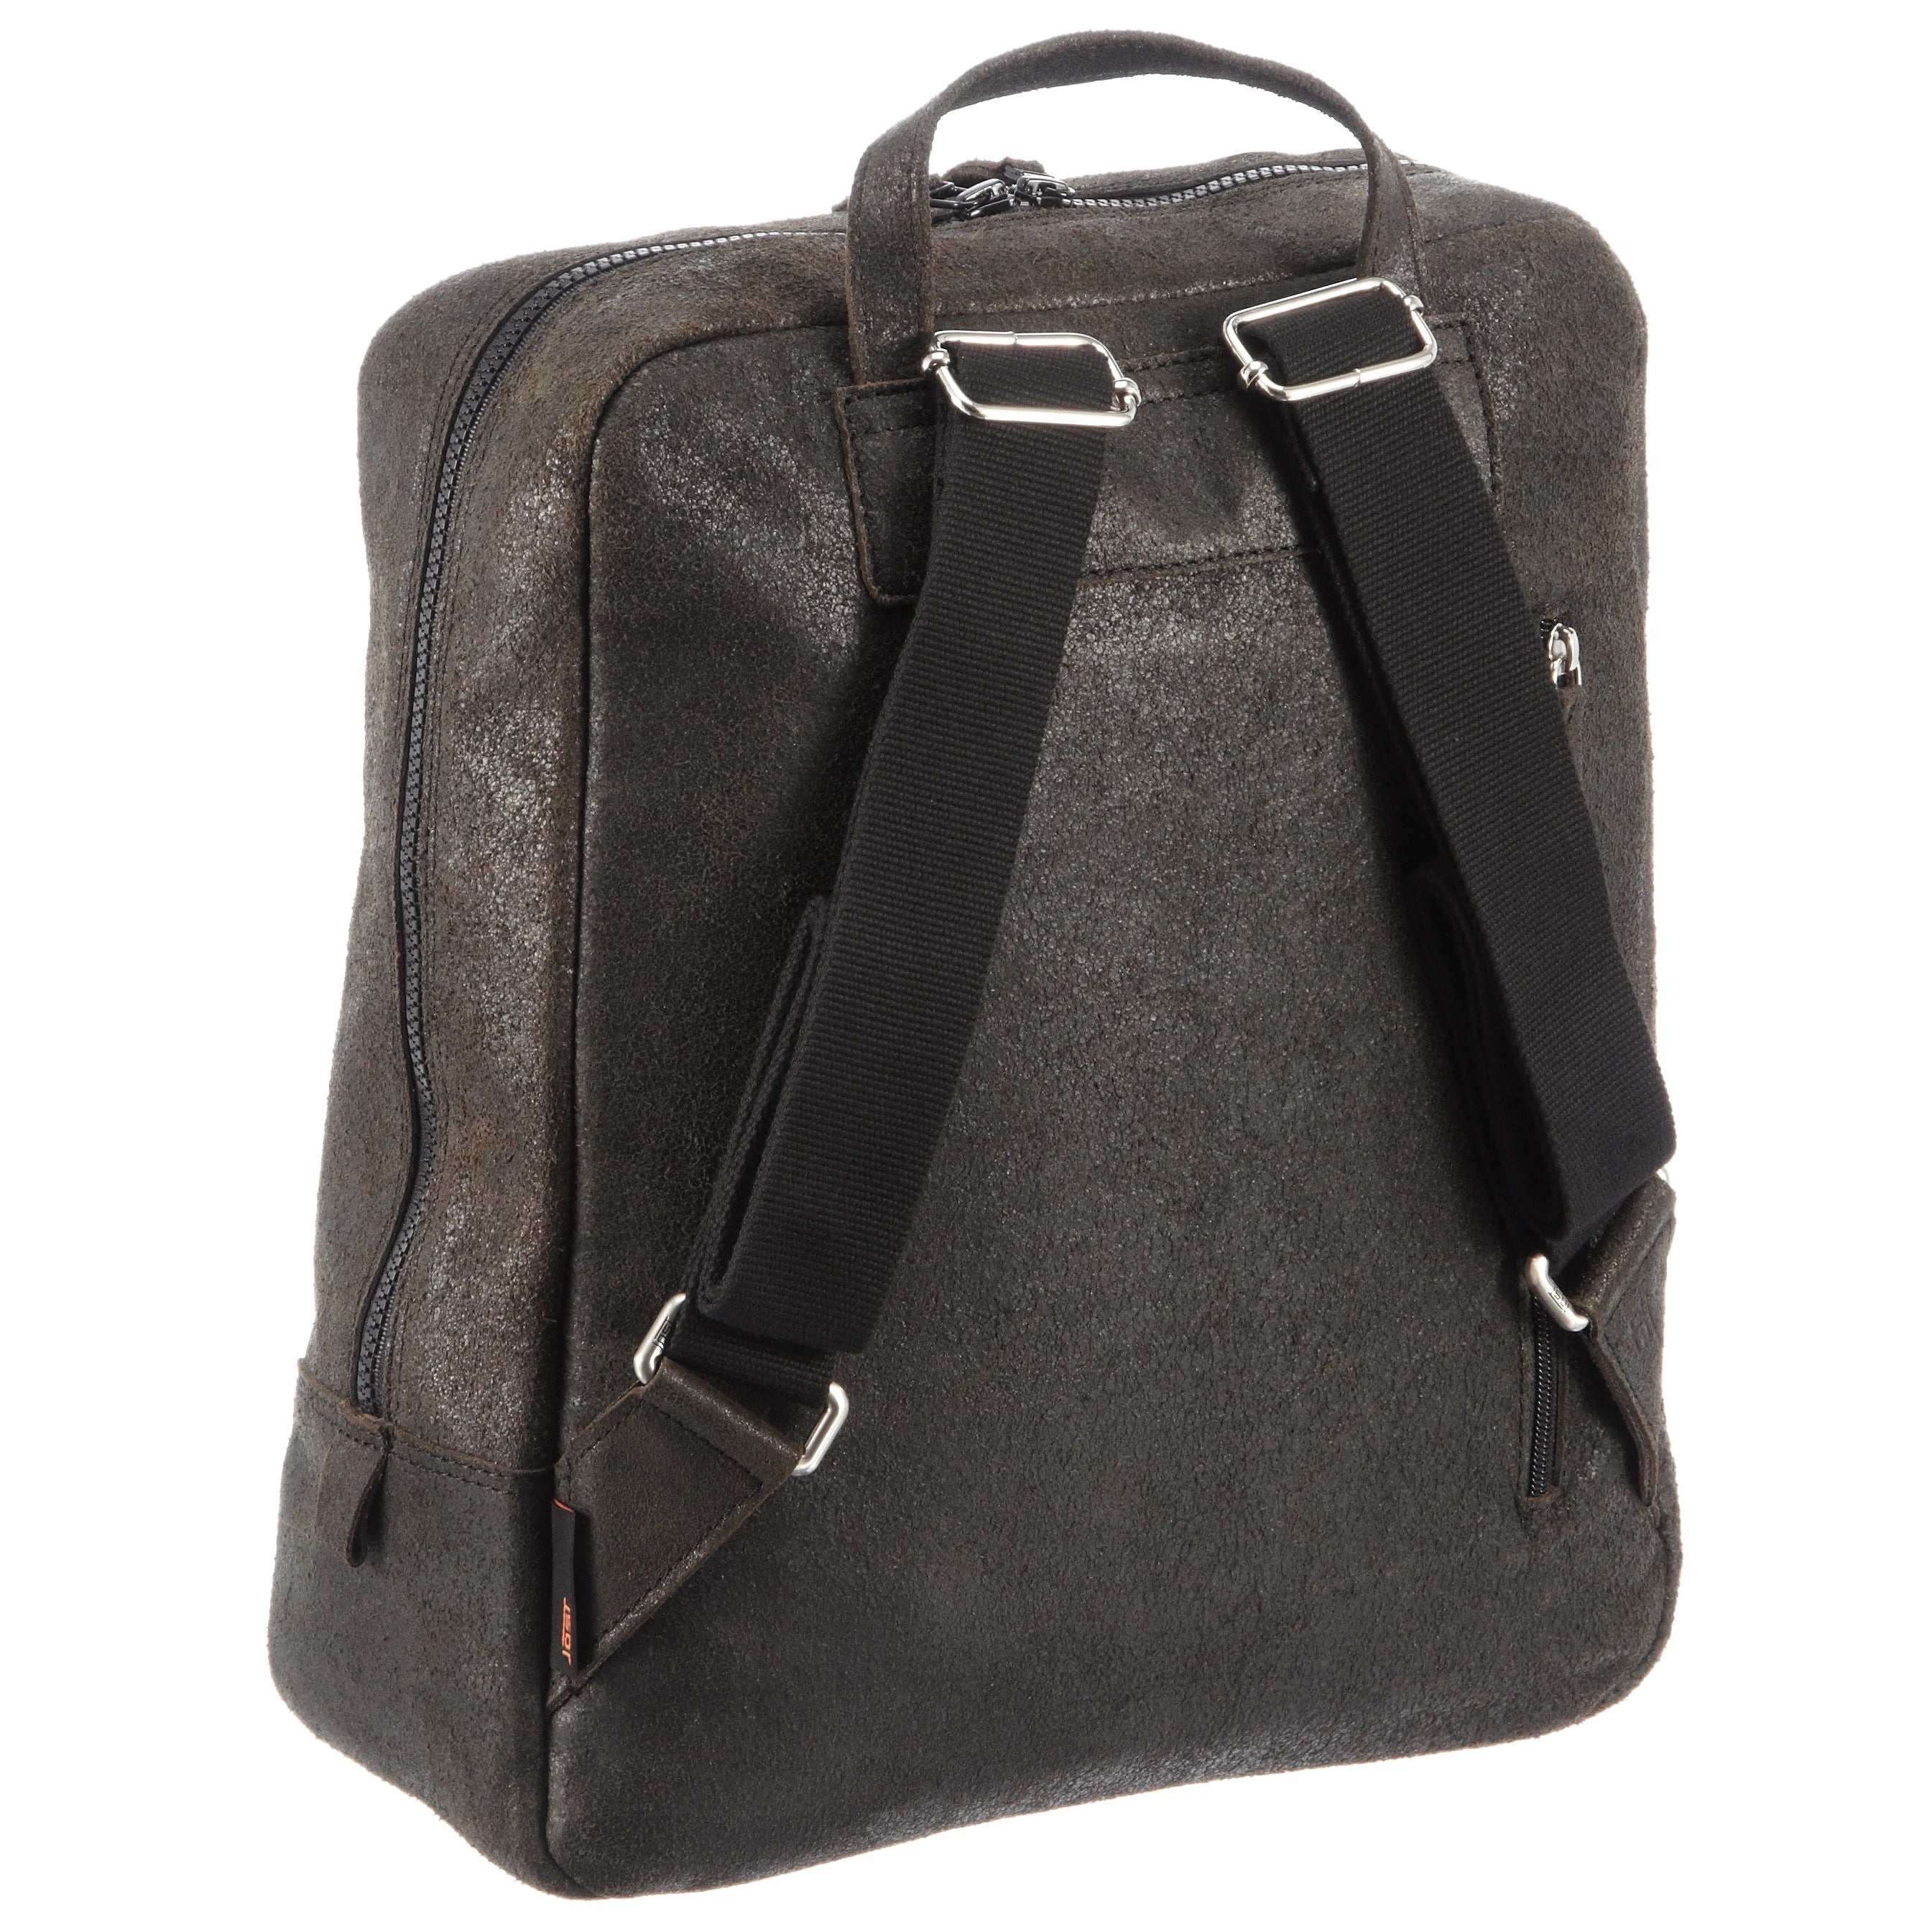 Jost Malmö backpack with laptop compartment 37 cm - black